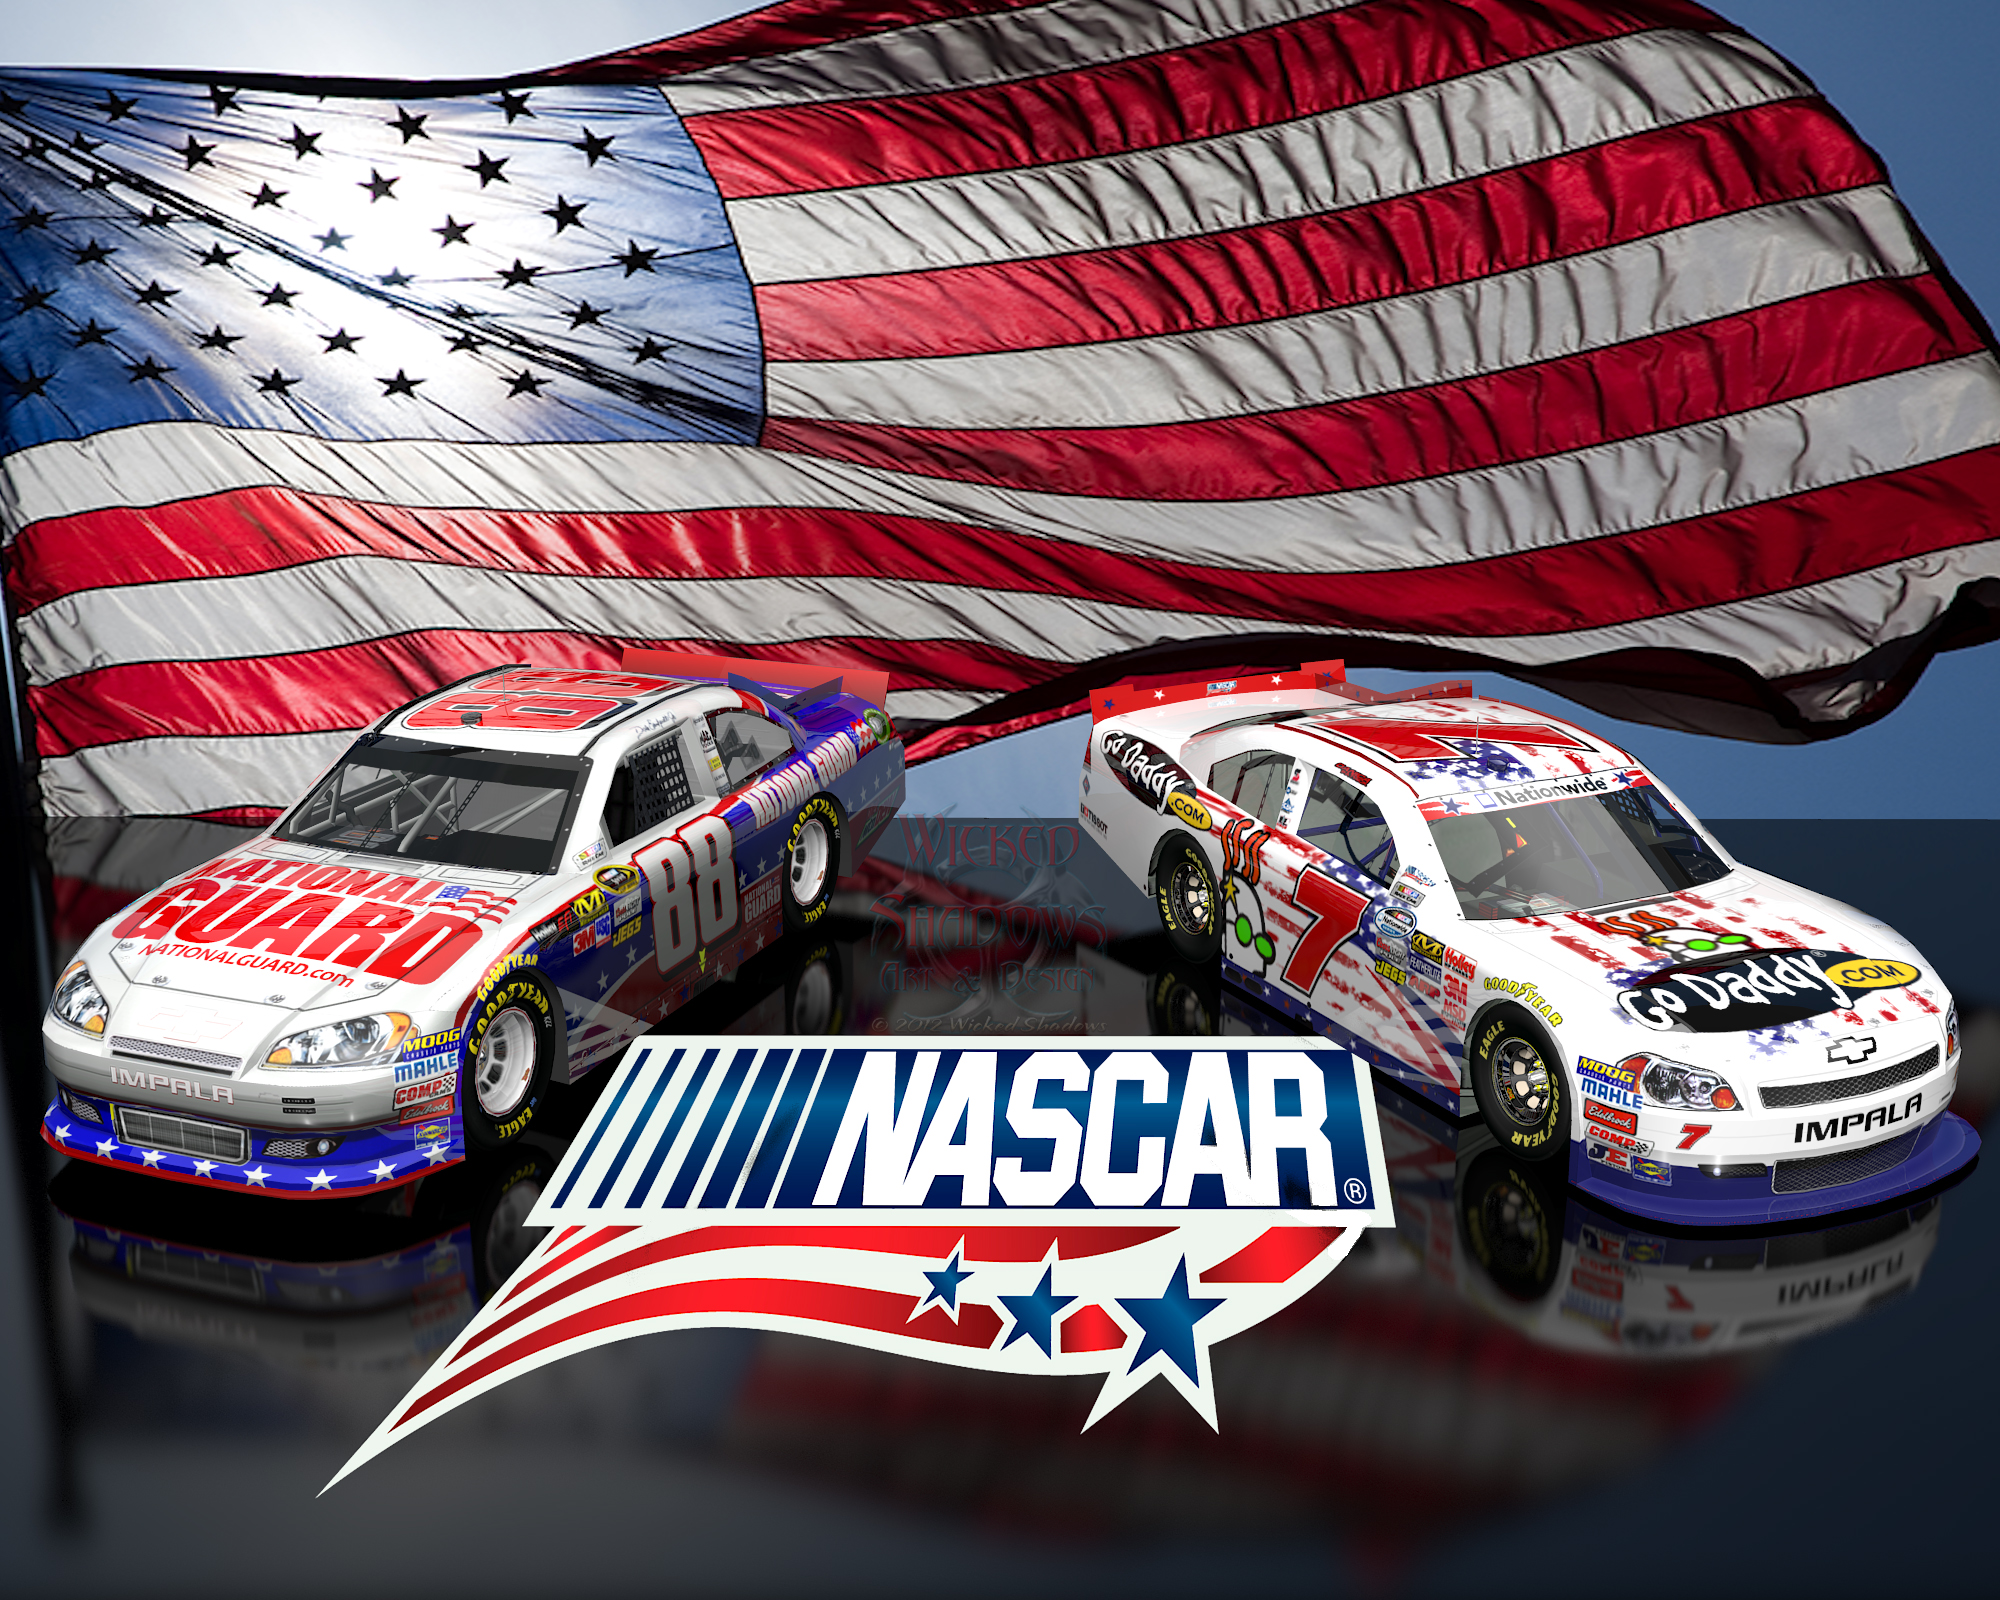 Wallpapers By Wicked Shadows: Dale Earnhardt Jr and Danica Patrick ...